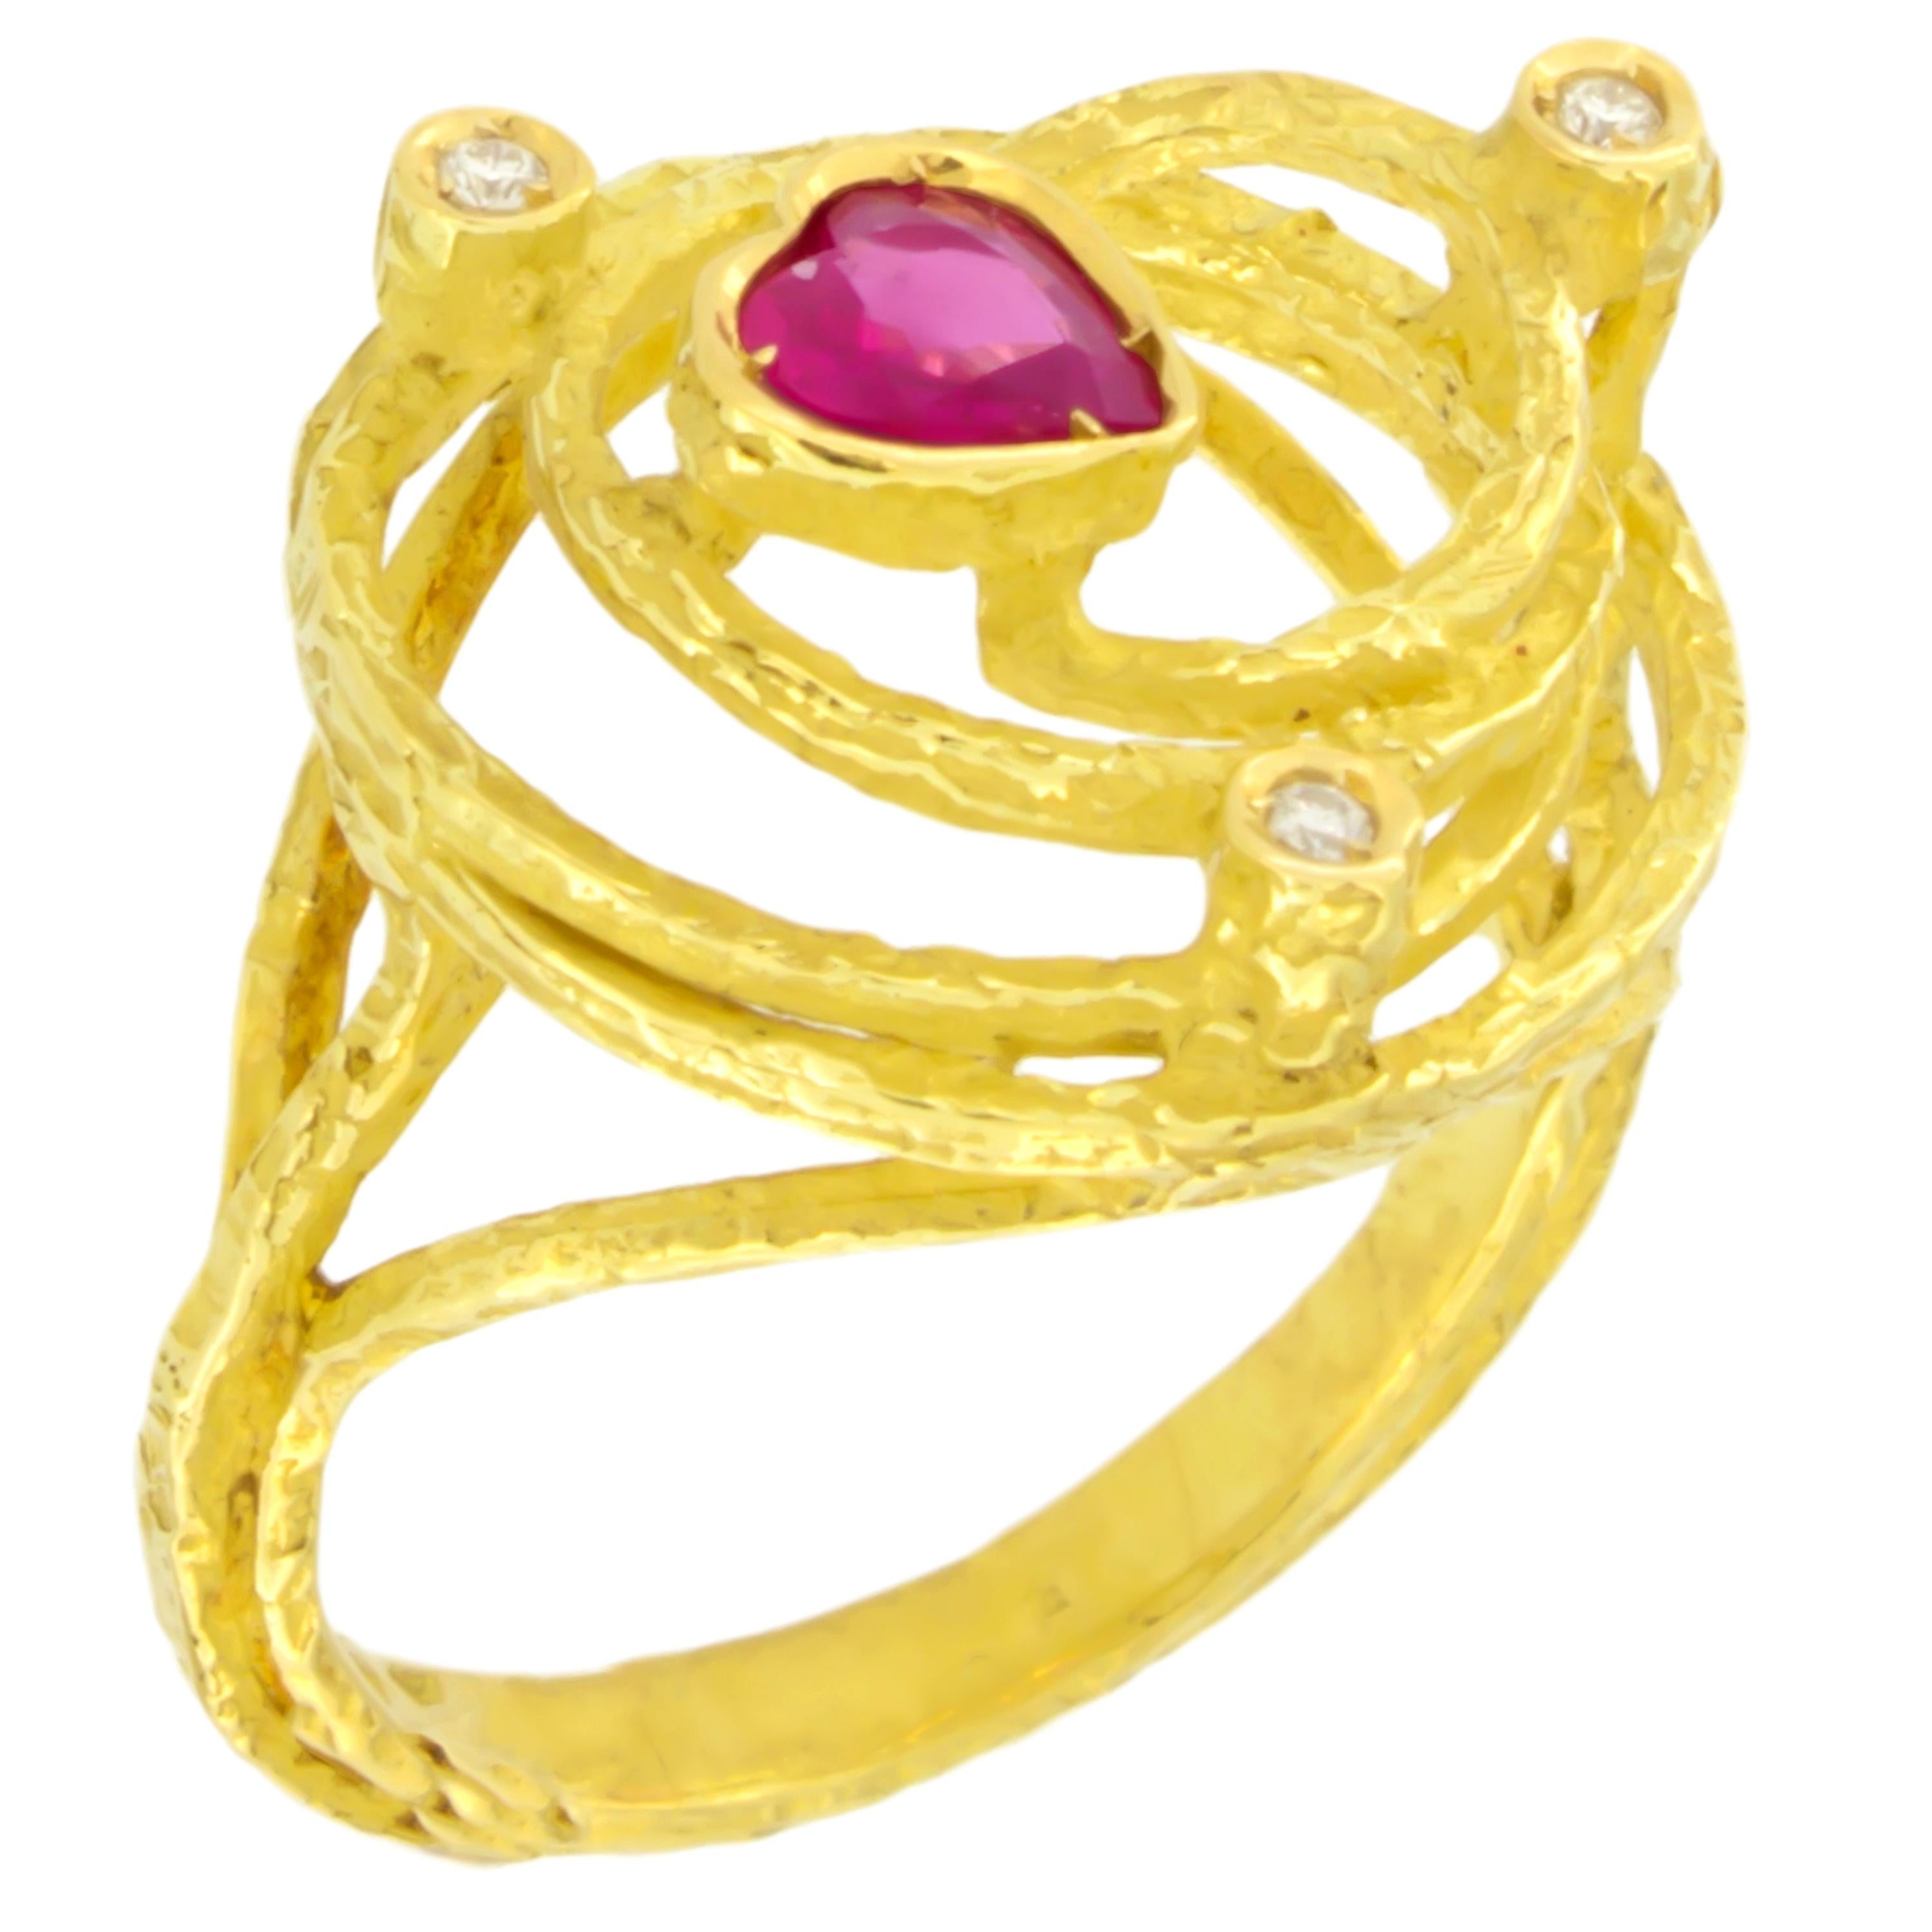 Lovely Small Size Heart Ruby and Diamonds Satin Yellow Gold Cocktail Ring, from Sacchi’s Universe Collection, hand-crafted with lost-wax casting technique.

Lost-wax casting, one of the oldest techniques for creating jewelry, forms the basis of